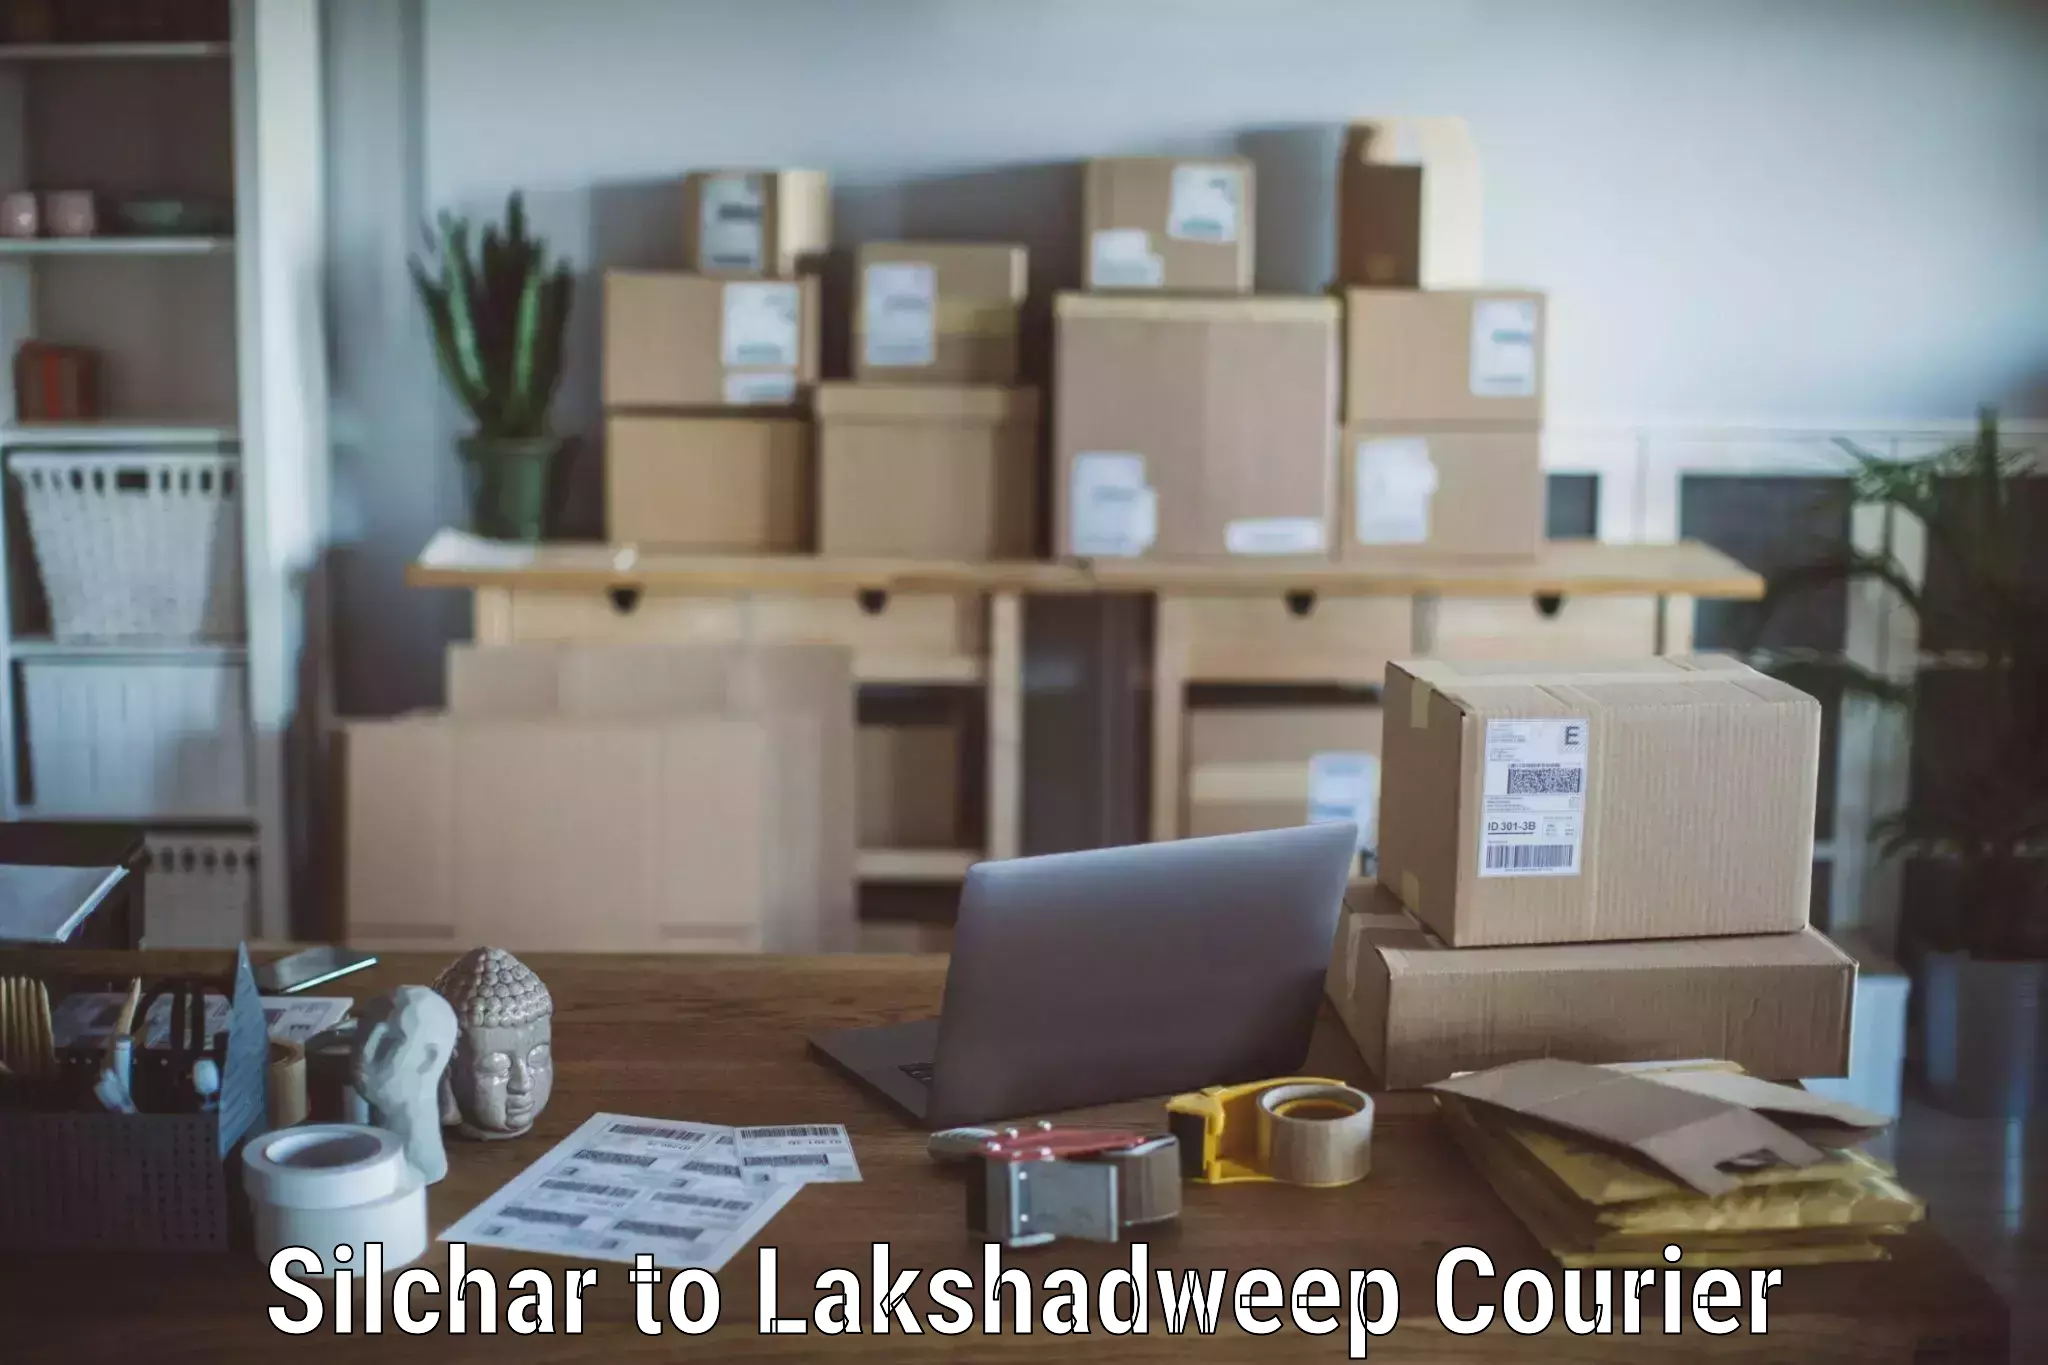 Furniture relocation experts Silchar to Lakshadweep